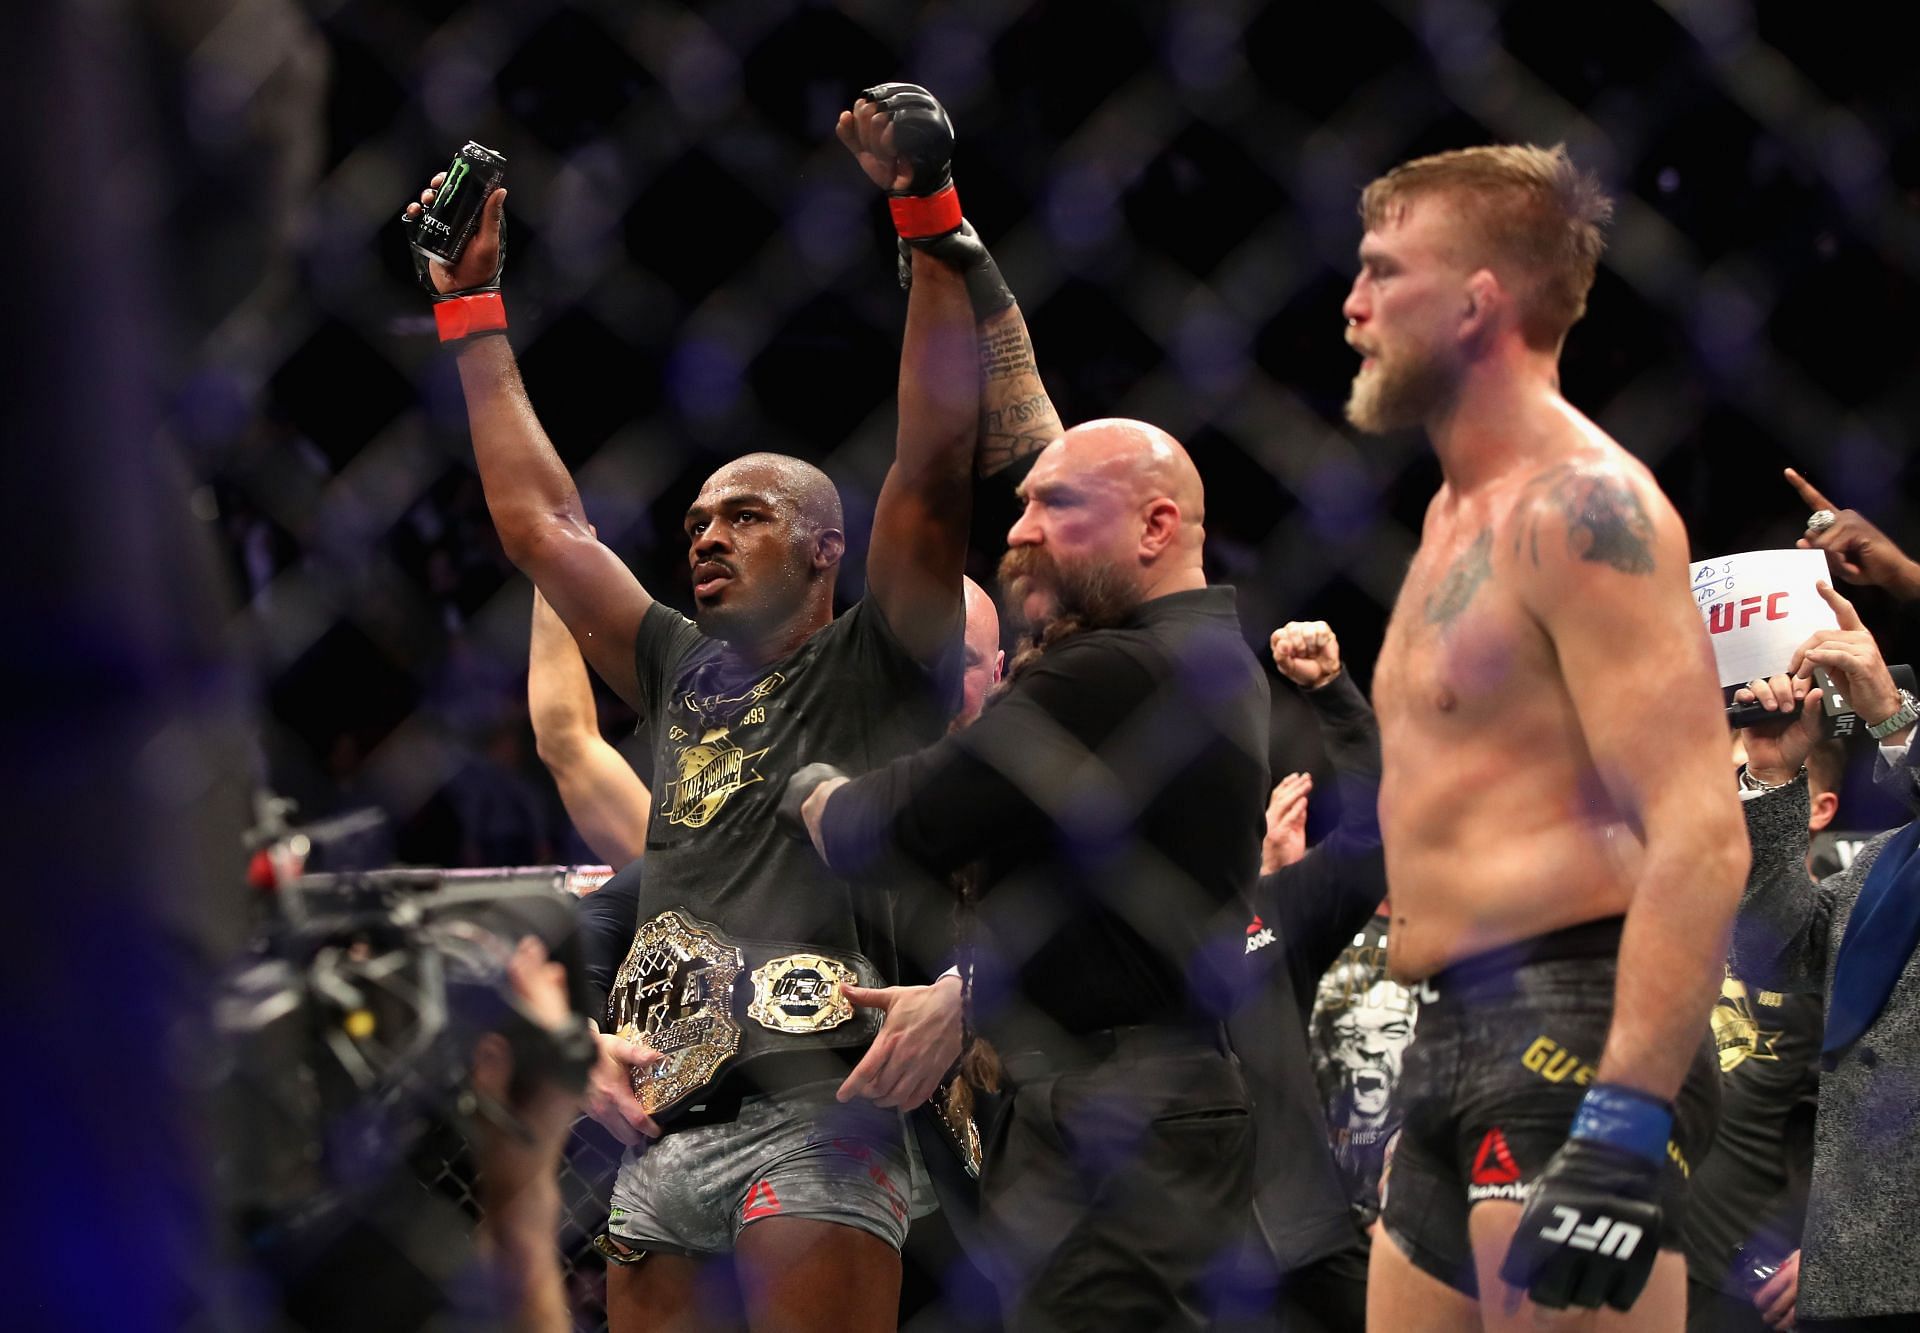 Jon Jones showed the heart of a champion when he came from behind to beat Alexander Gustafsson